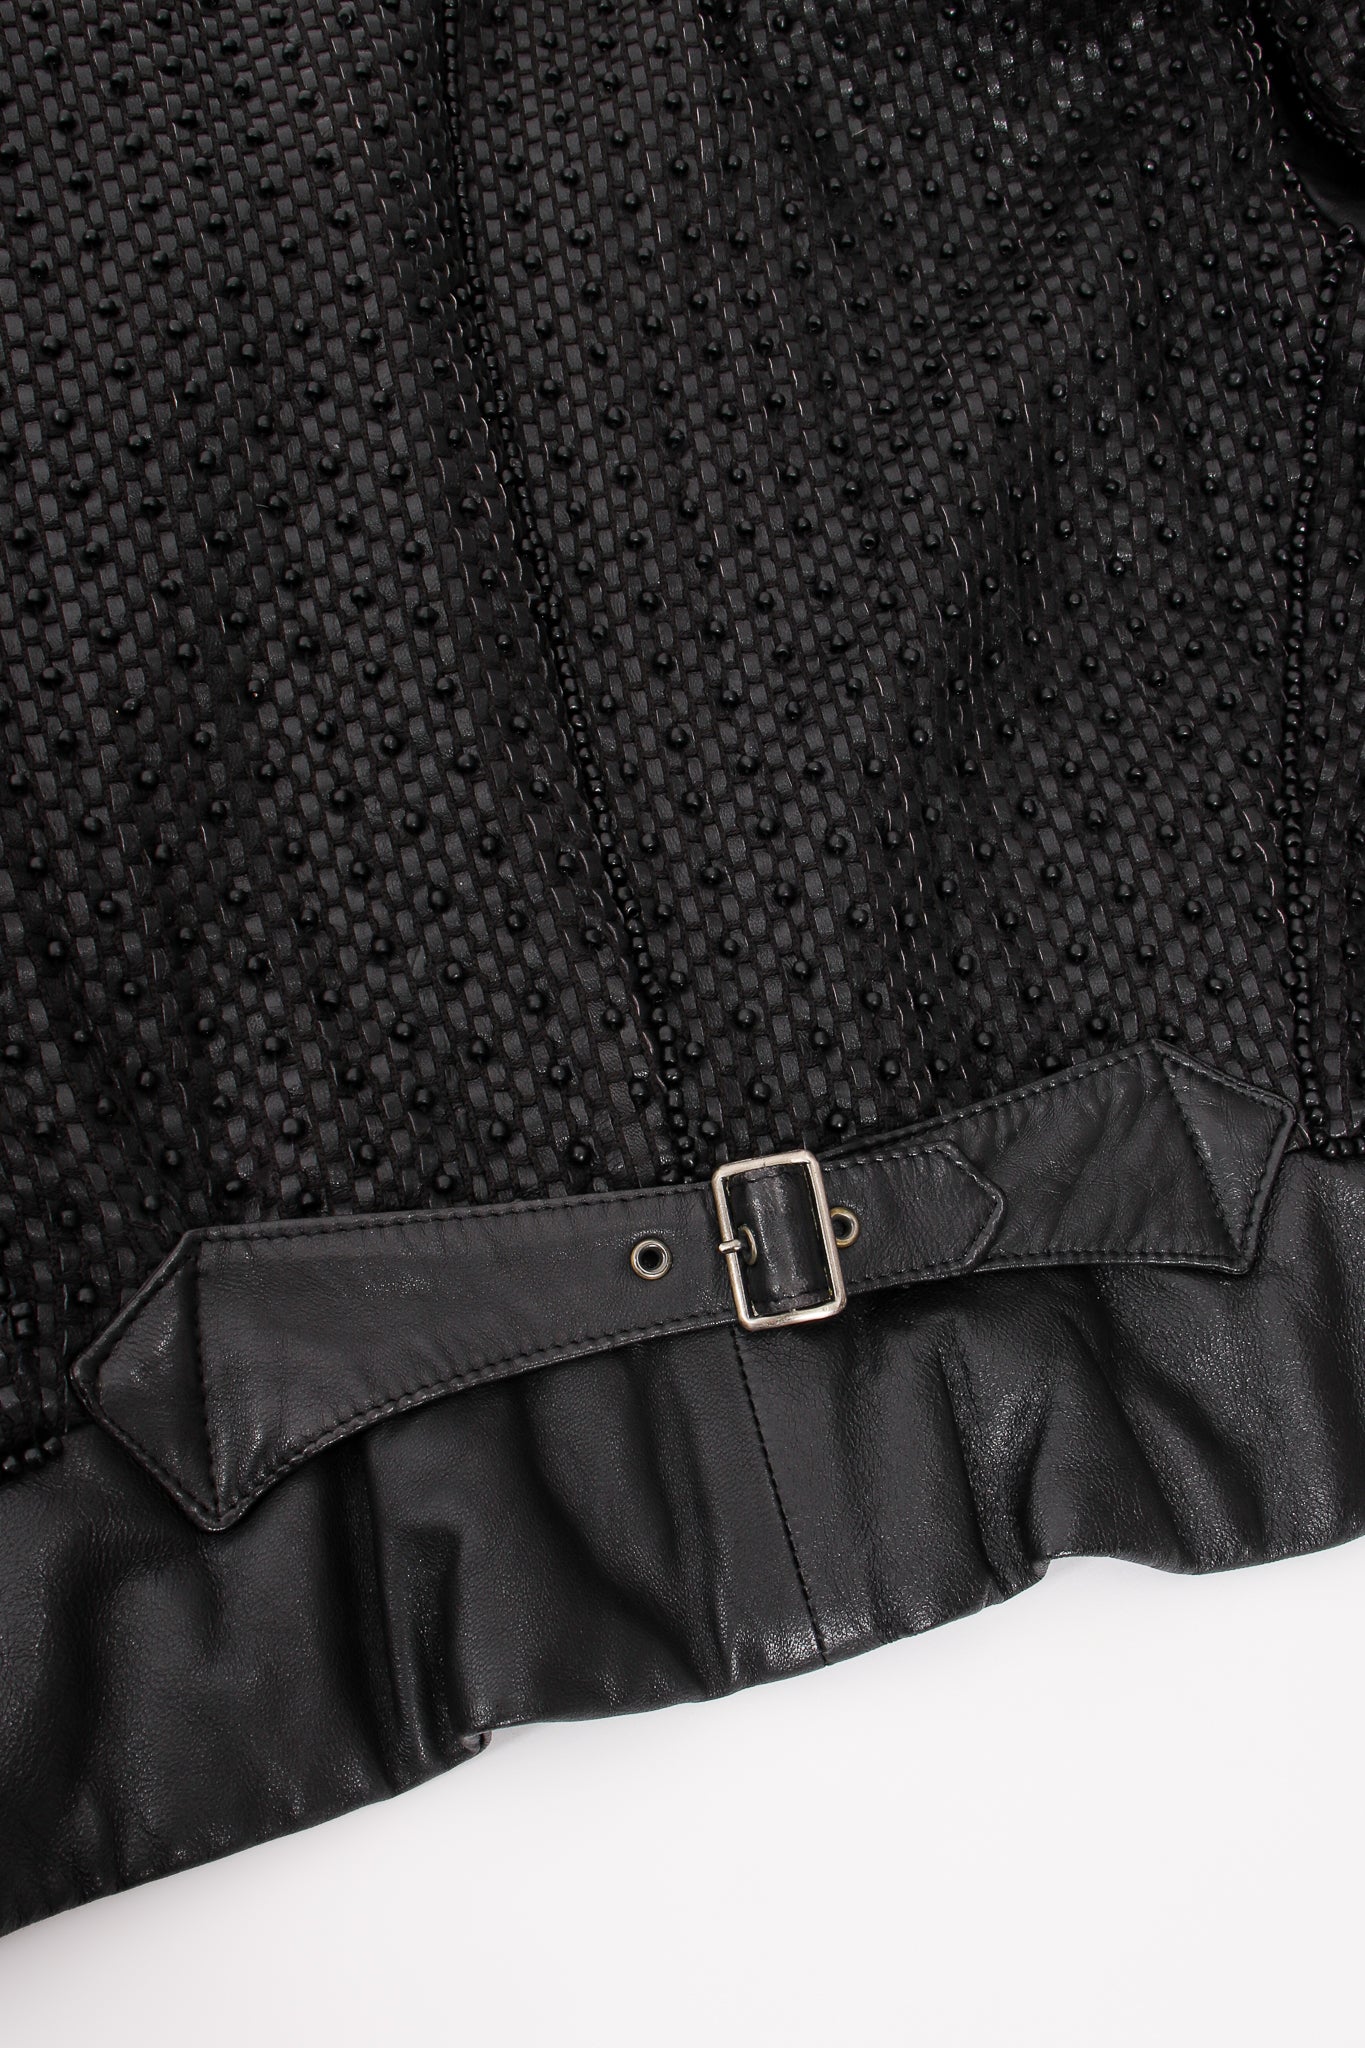 Vintage Issey Miyake Beaded Woven Leather Jacket back buckle at Recess Los Angeles